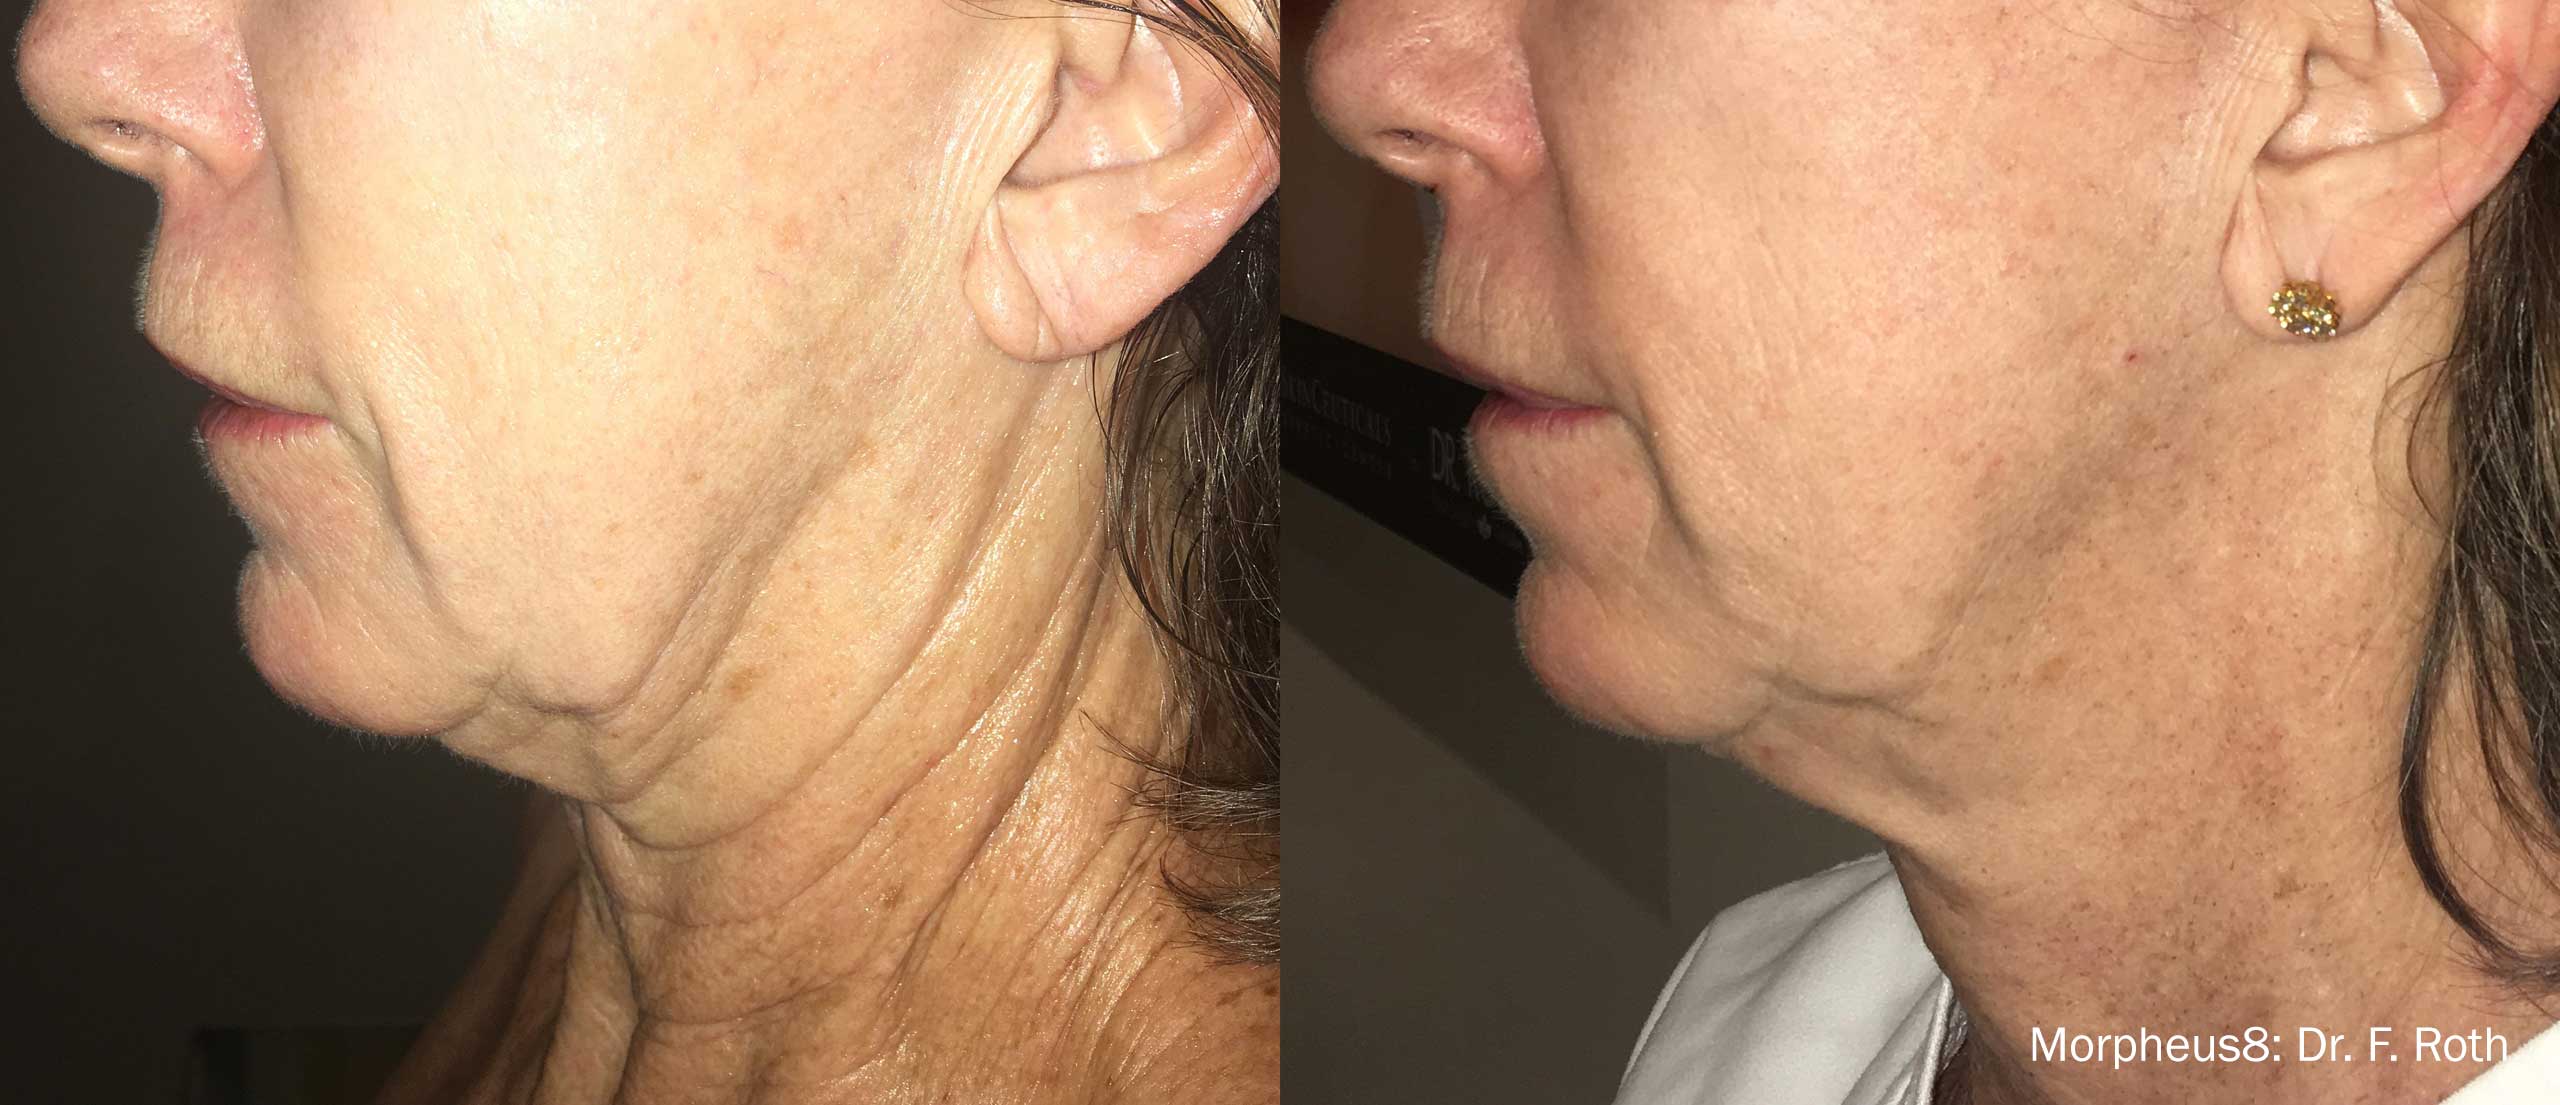 Woman's neck shows loose, wrinkled skin before and smoother, tighter skin after Morepheus 8 treatment.